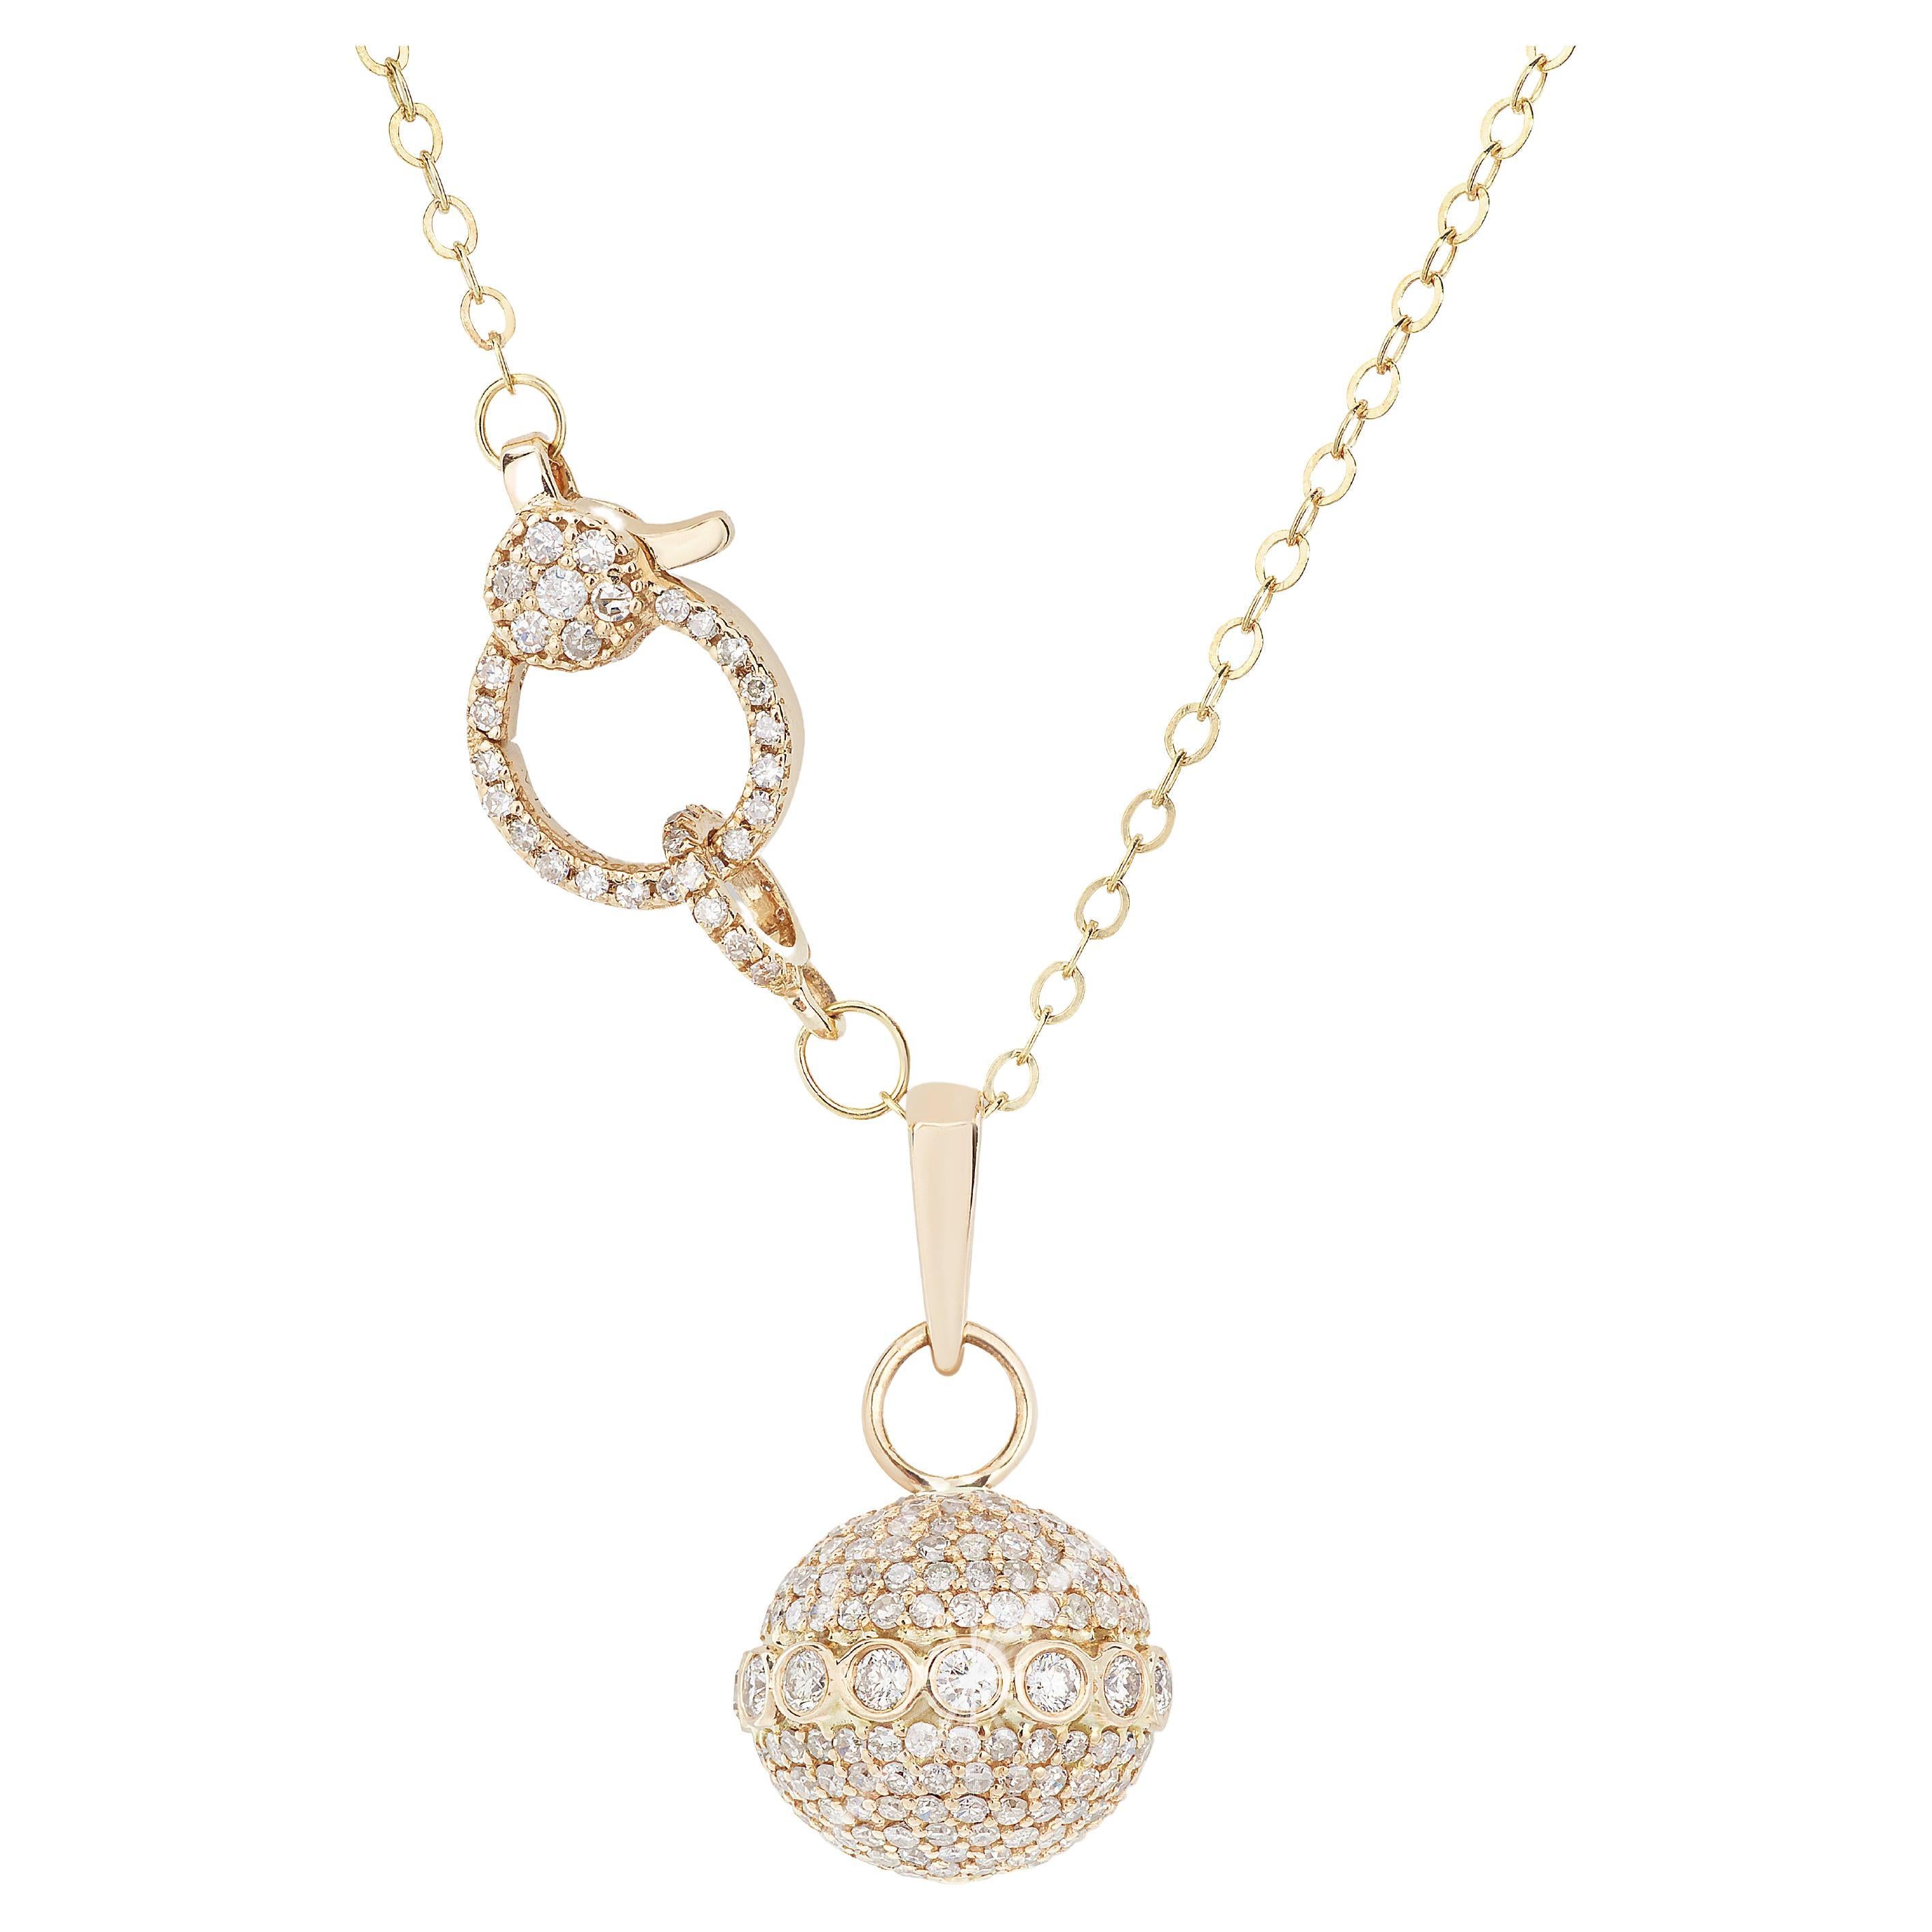 18k Yellow Gold Orb Necklace with Diamond-Encrusted Clasp